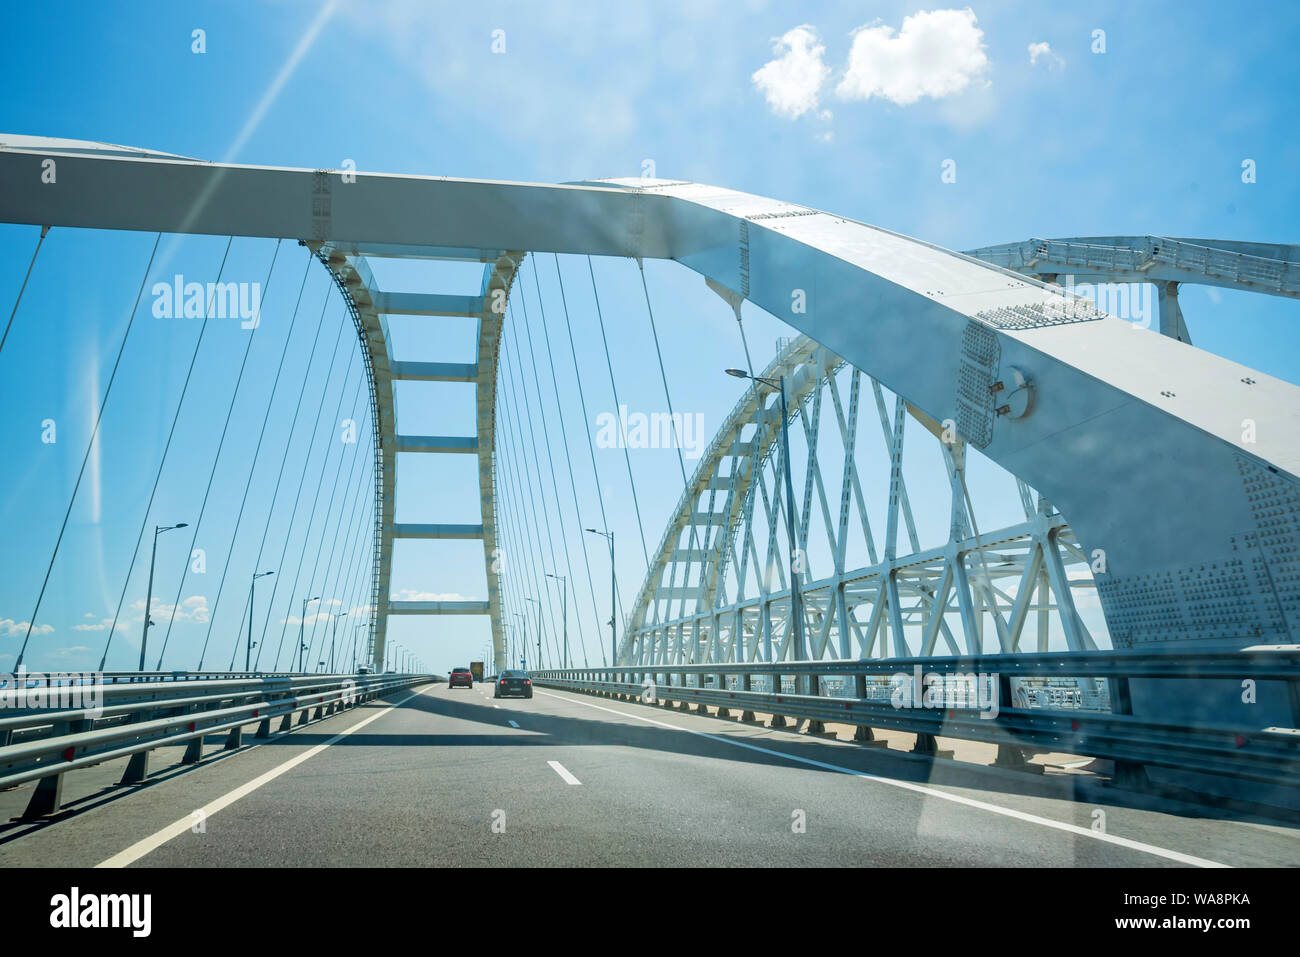 KERCH, RUSSIA - 5 AUGUST 2019: Cars go on the Crimean automobile bridge connecting the banks of the Kerch Strait: Taman and Kerch. Sunny summer day Stock Photo